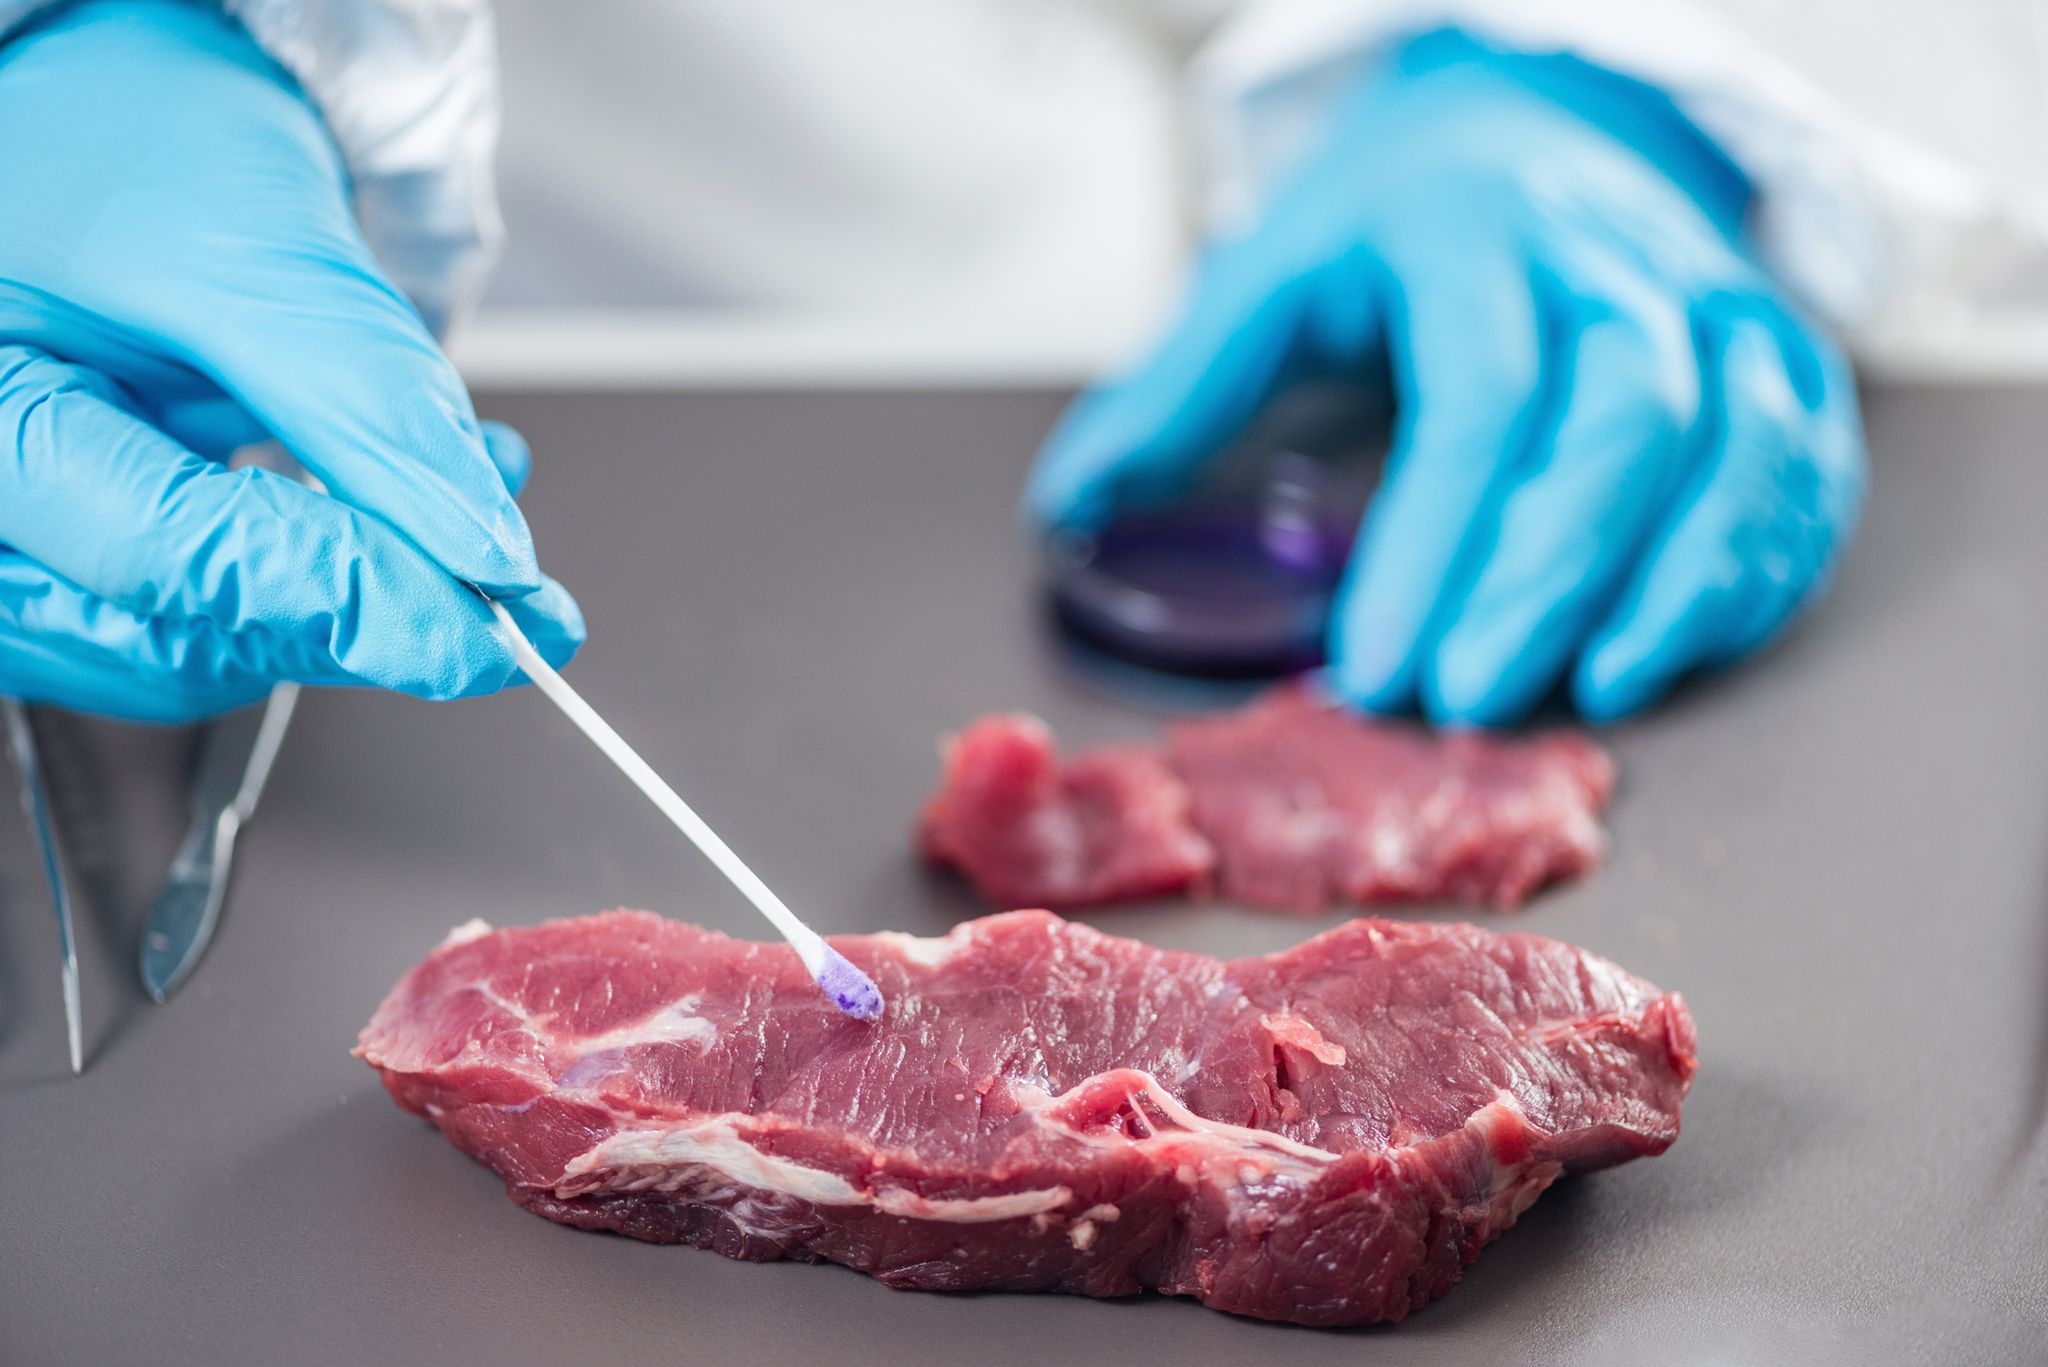 Most of the Meat We Eat Could Be “Lab-Grown” or Plant-Based Within 20 Years